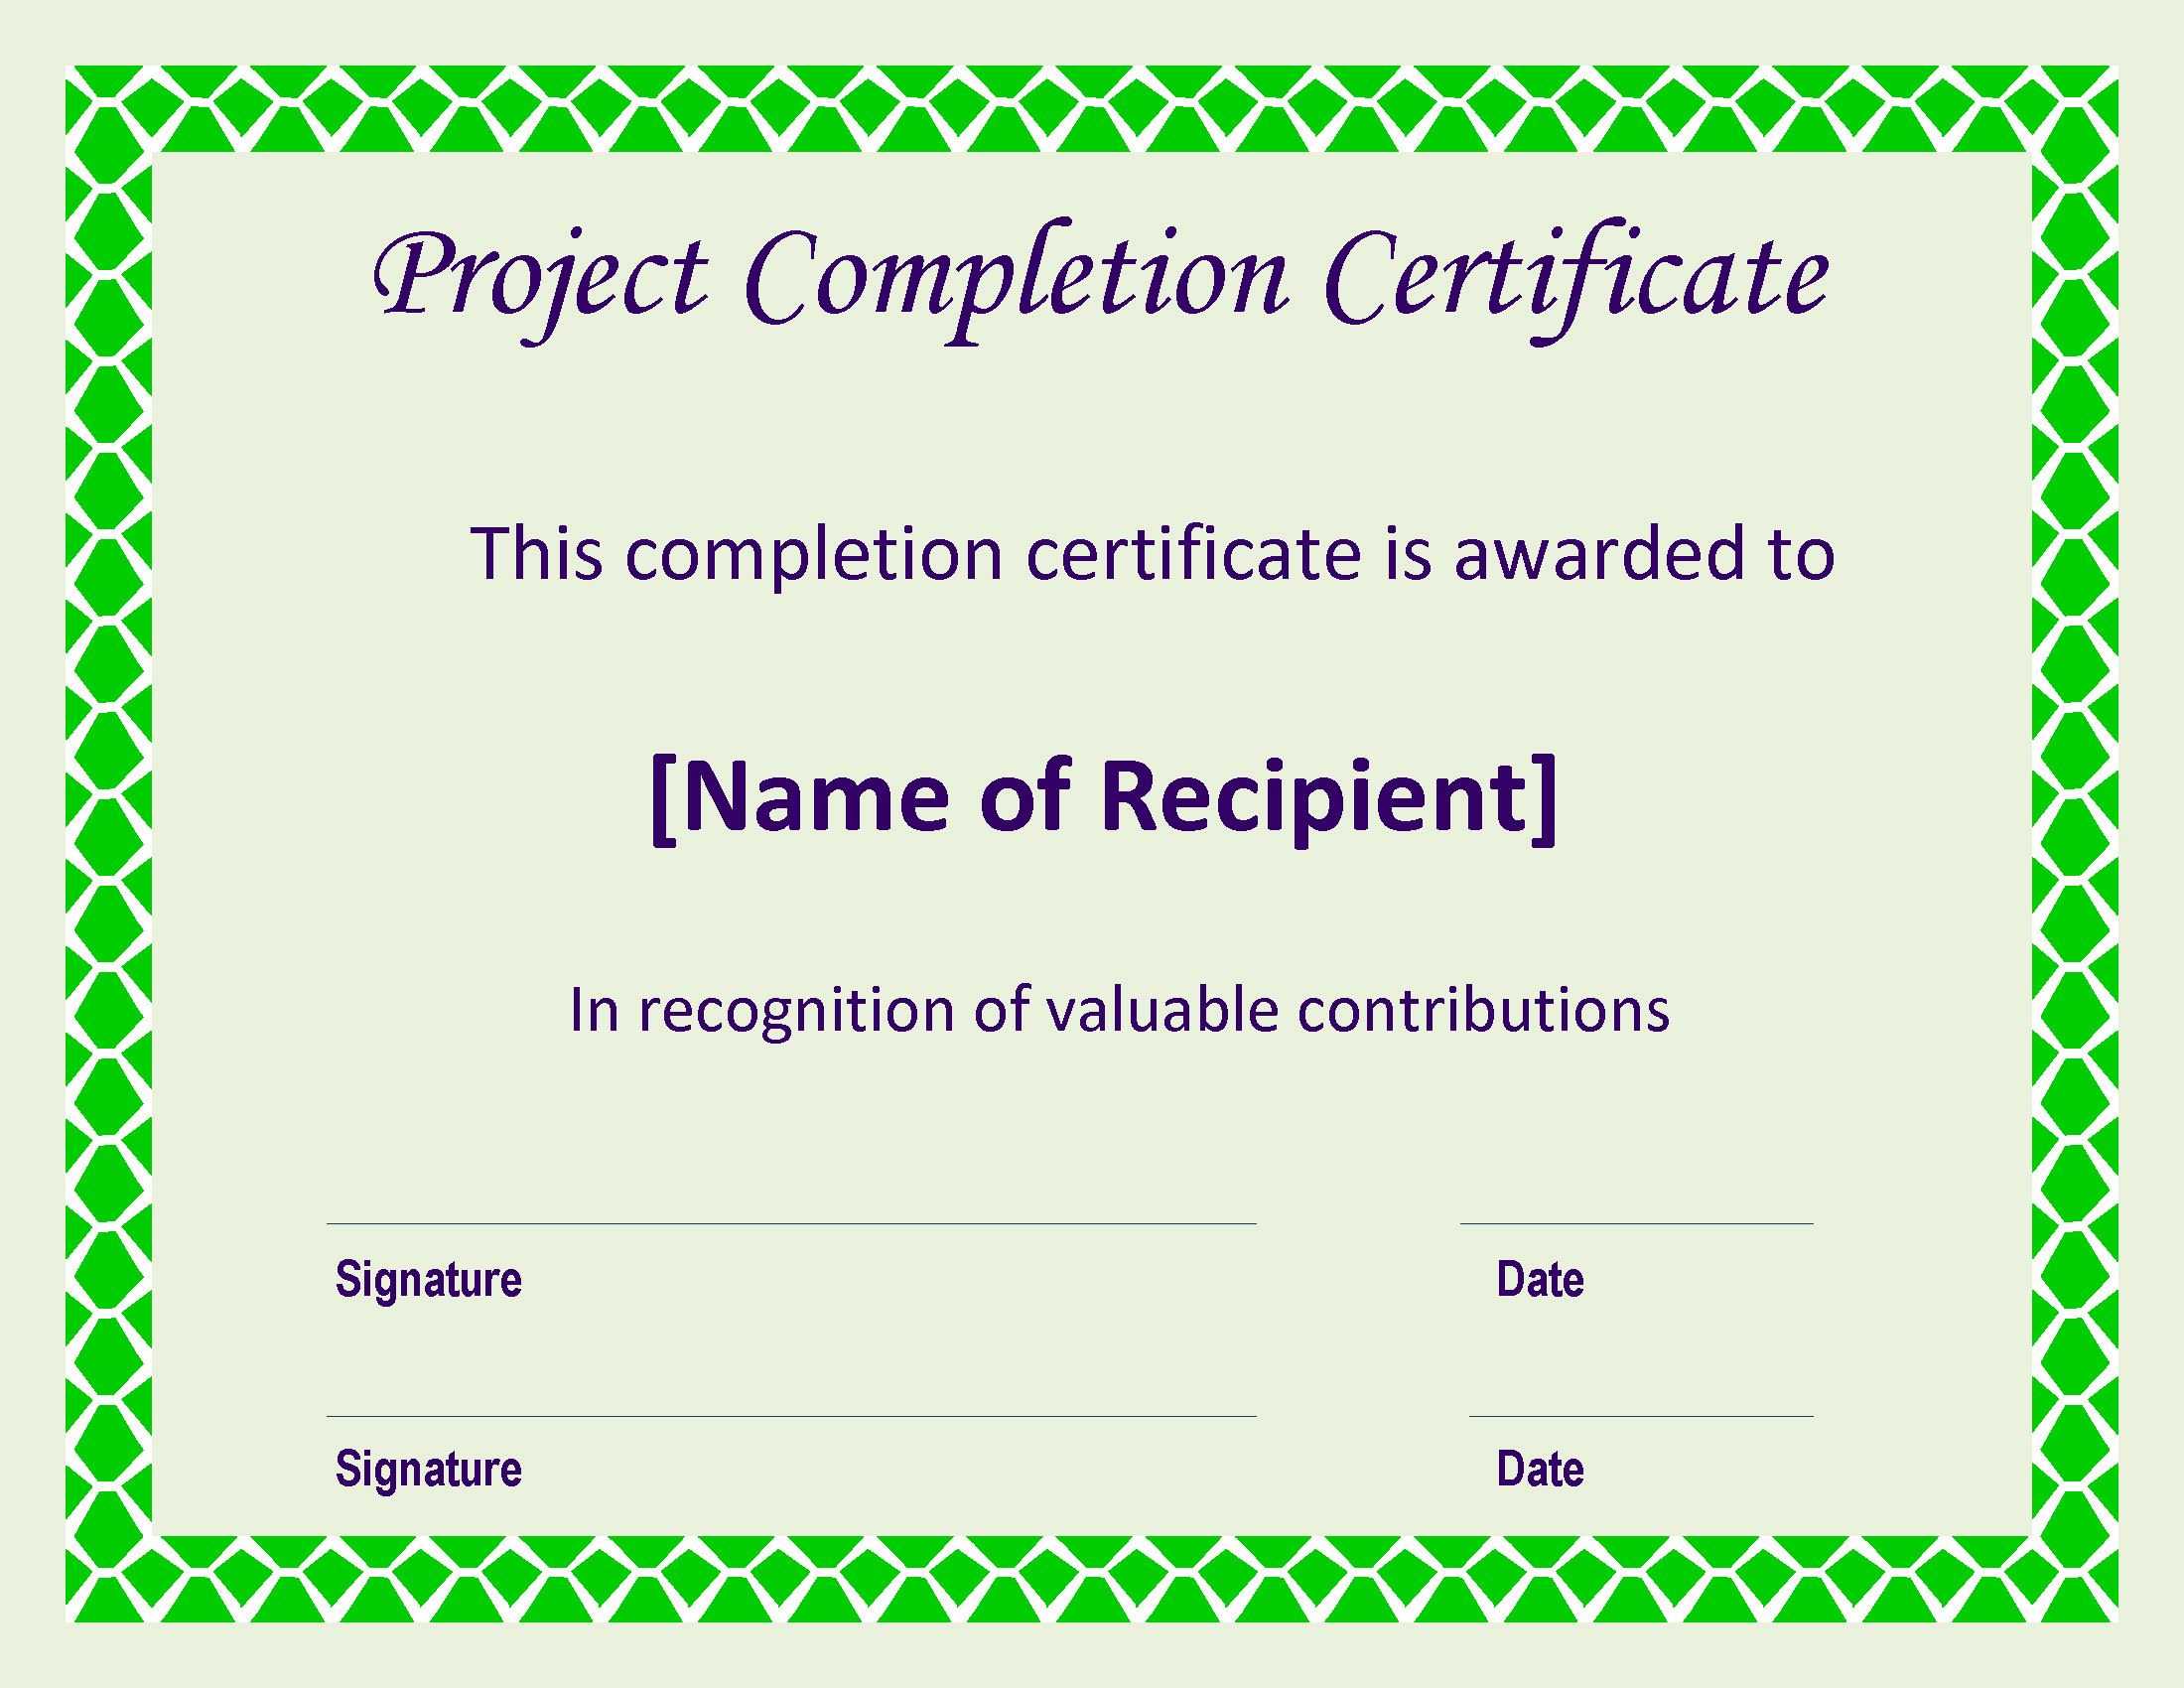 Certificate Of Completion Project | Templates At With Regard To Certificate Of Completion Construction Templates